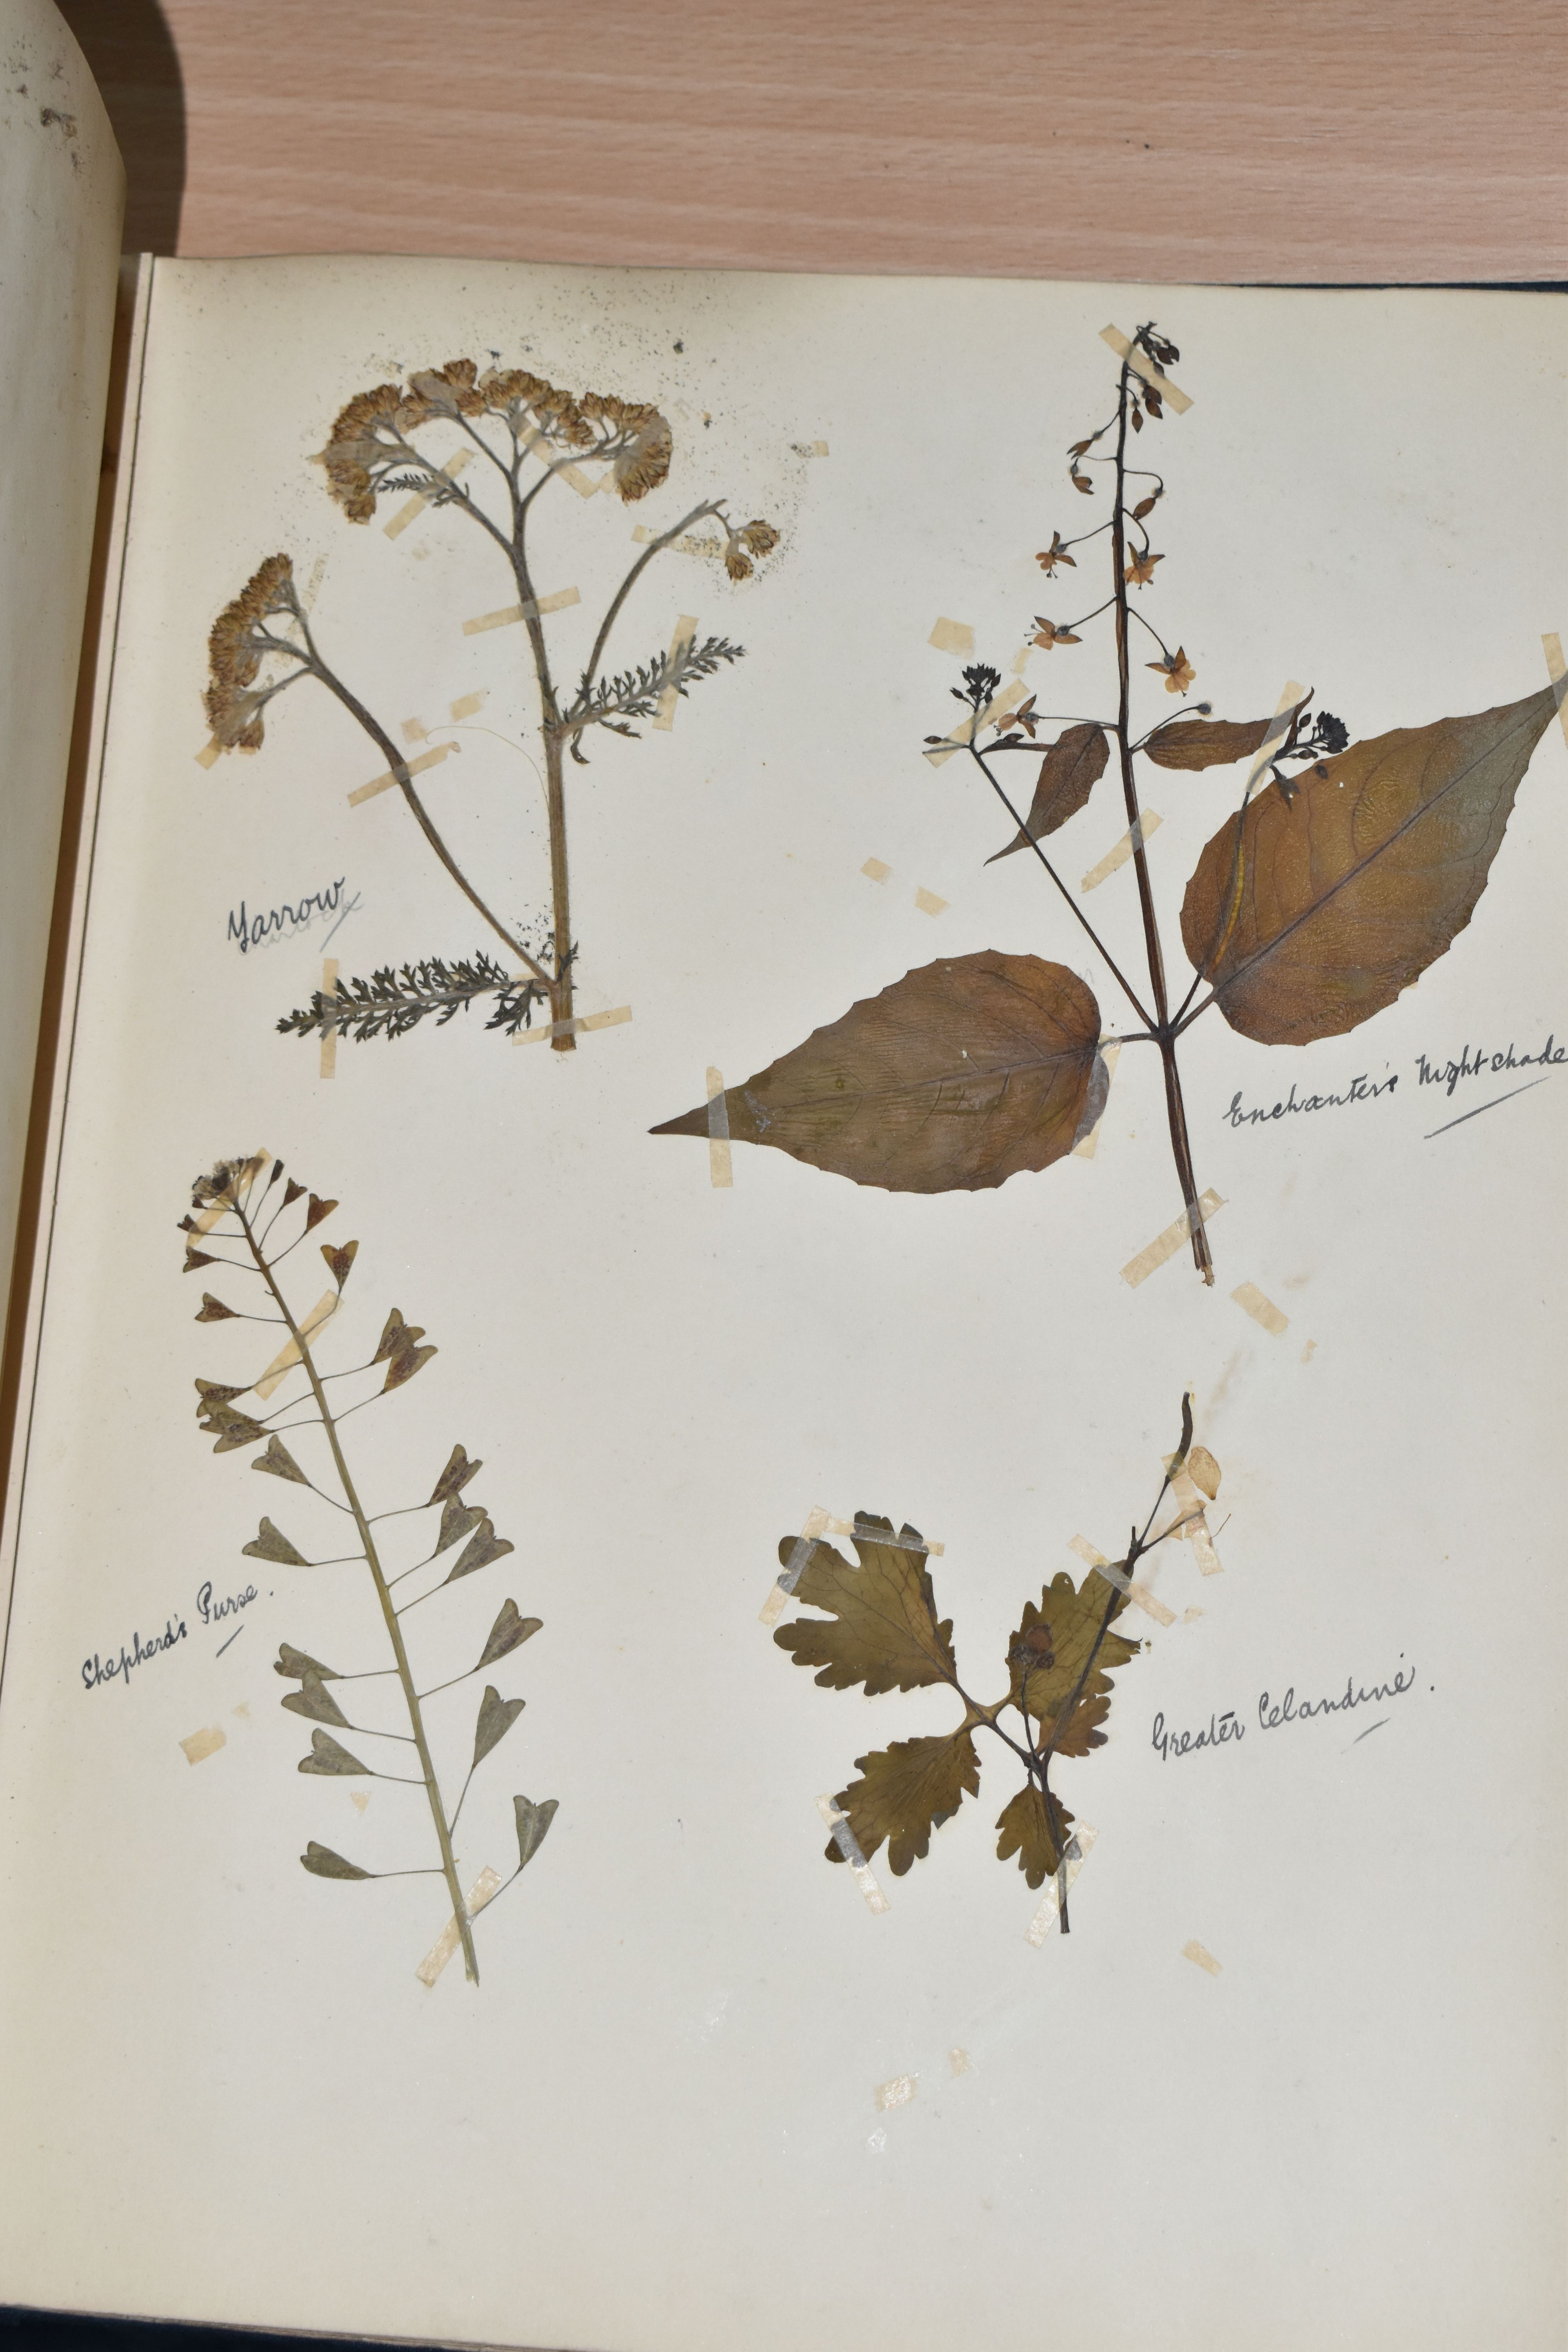 ONE BOOK OF PRESSED HERBS & PLANTS examples include Hop Trefoil, Daisy, Wild Thyme, Mallow, Wild - Image 8 of 16